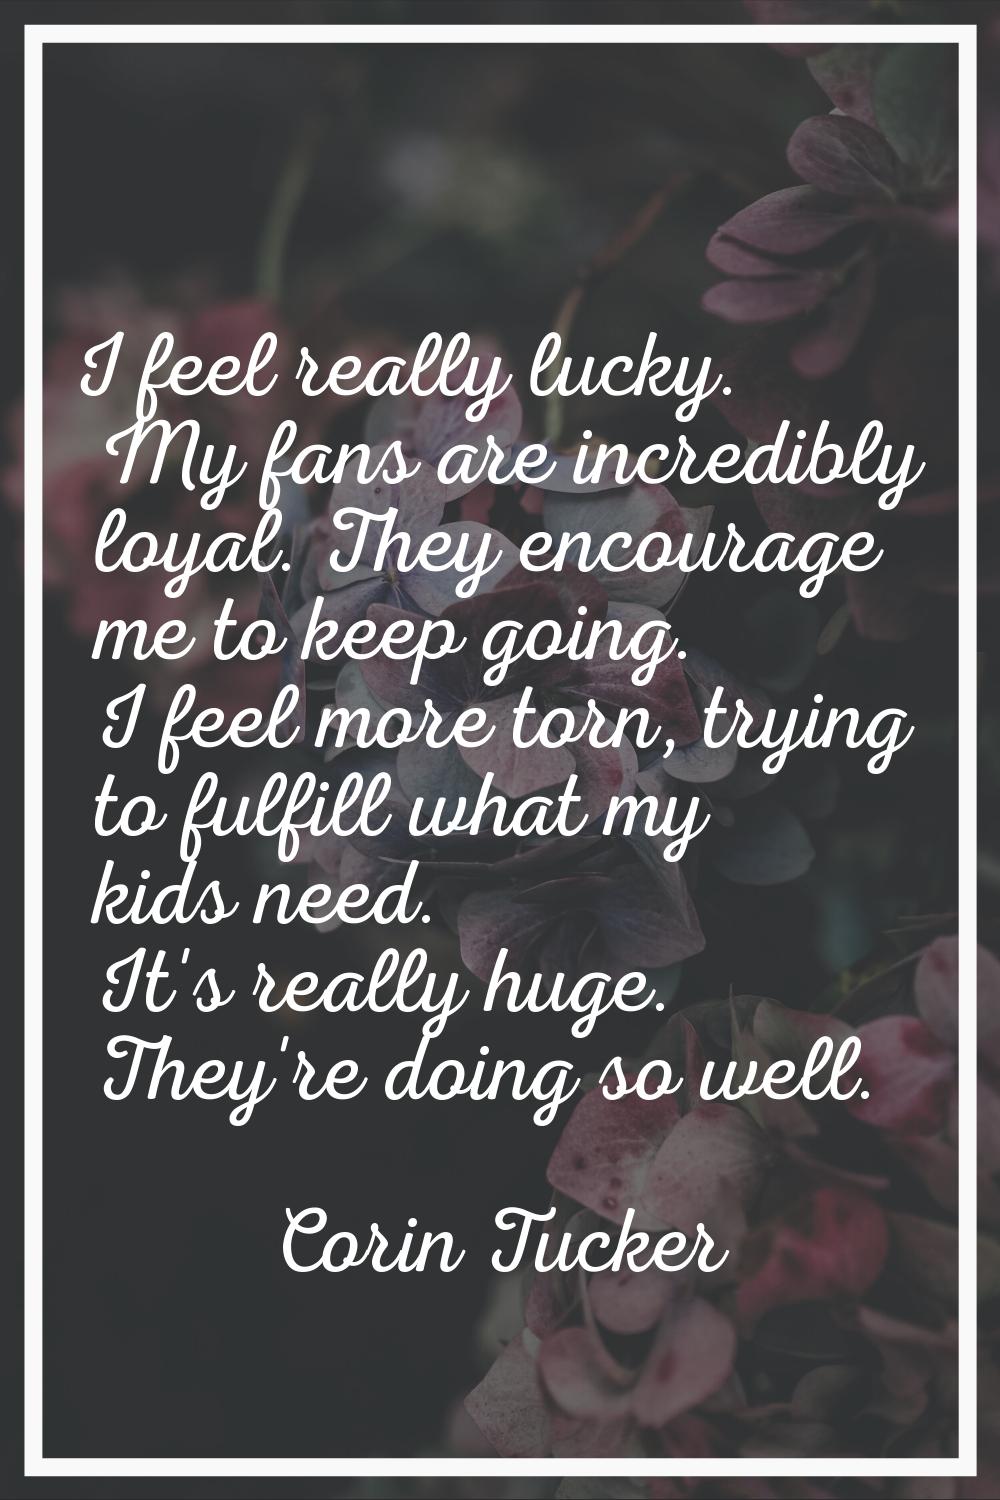 I feel really lucky. My fans are incredibly loyal. They encourage me to keep going. I feel more tor